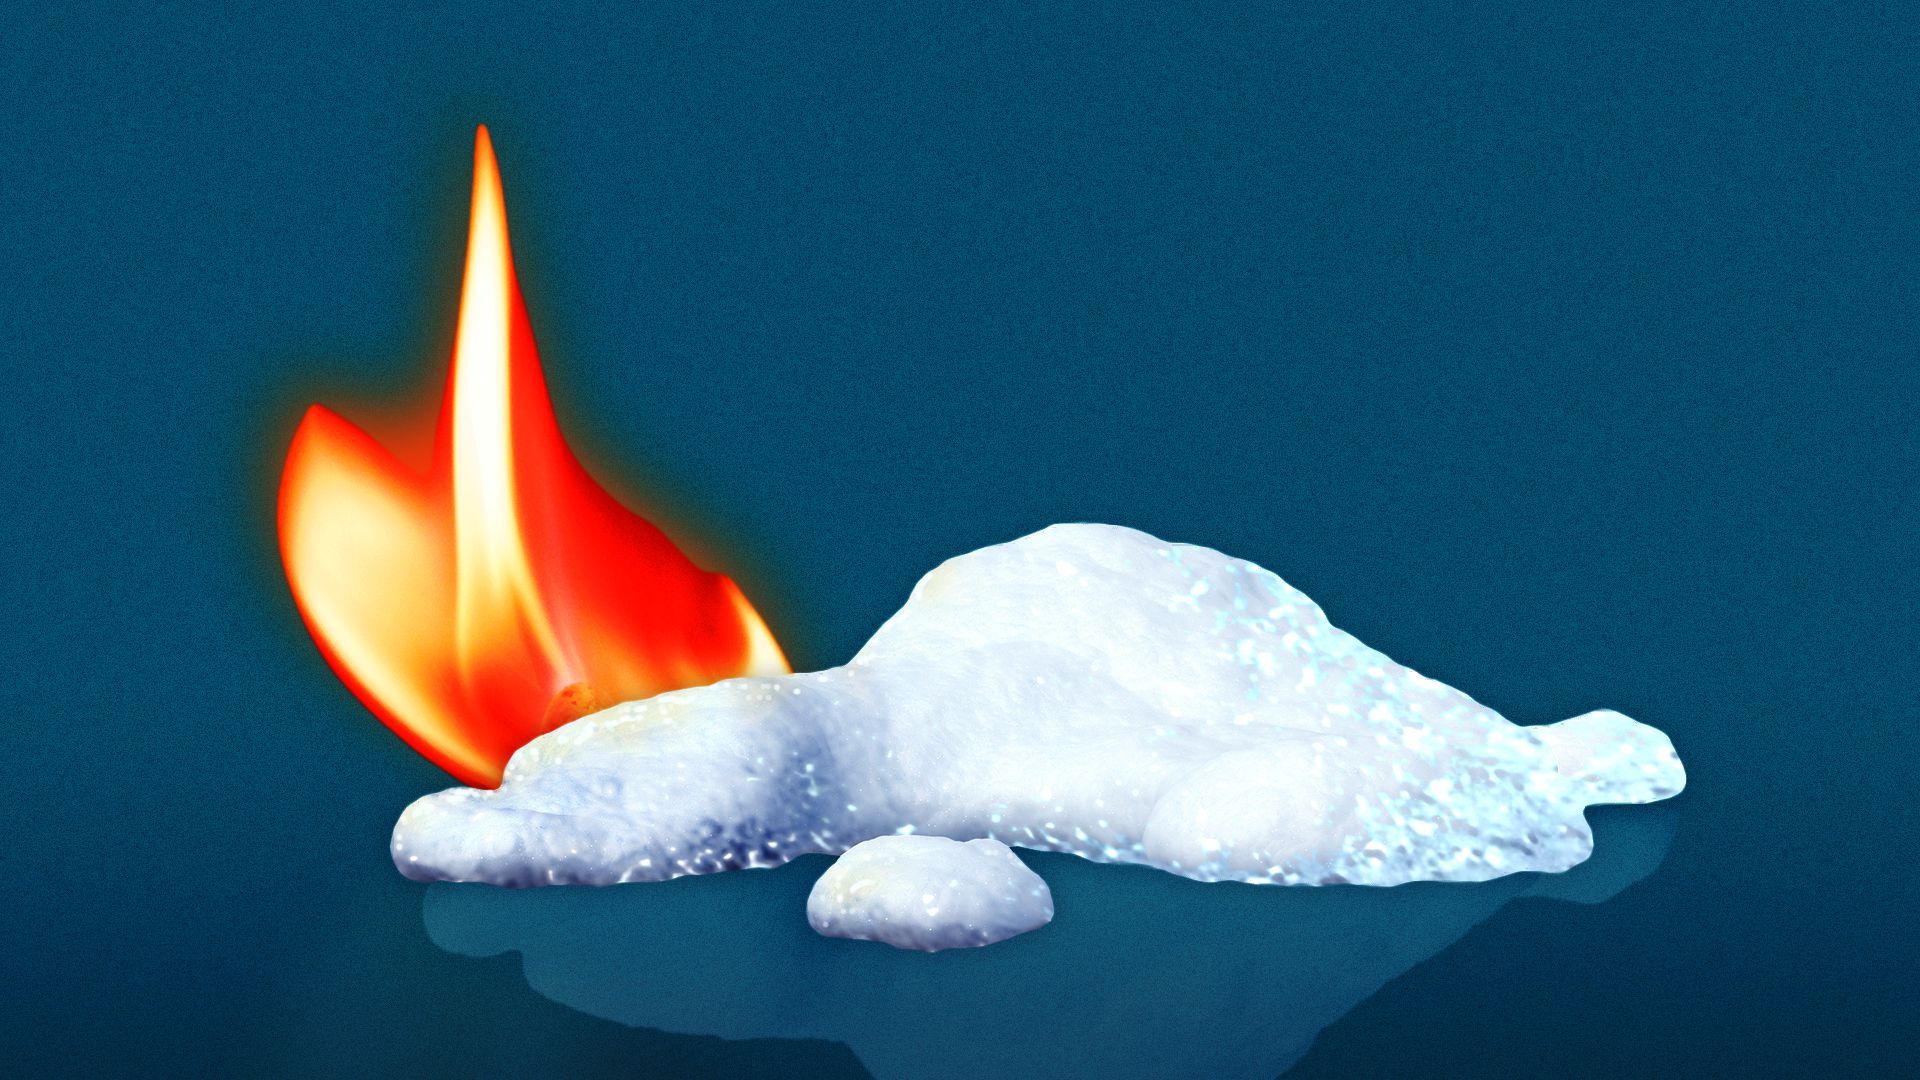 Illustration of pile of melting snow next to a flame